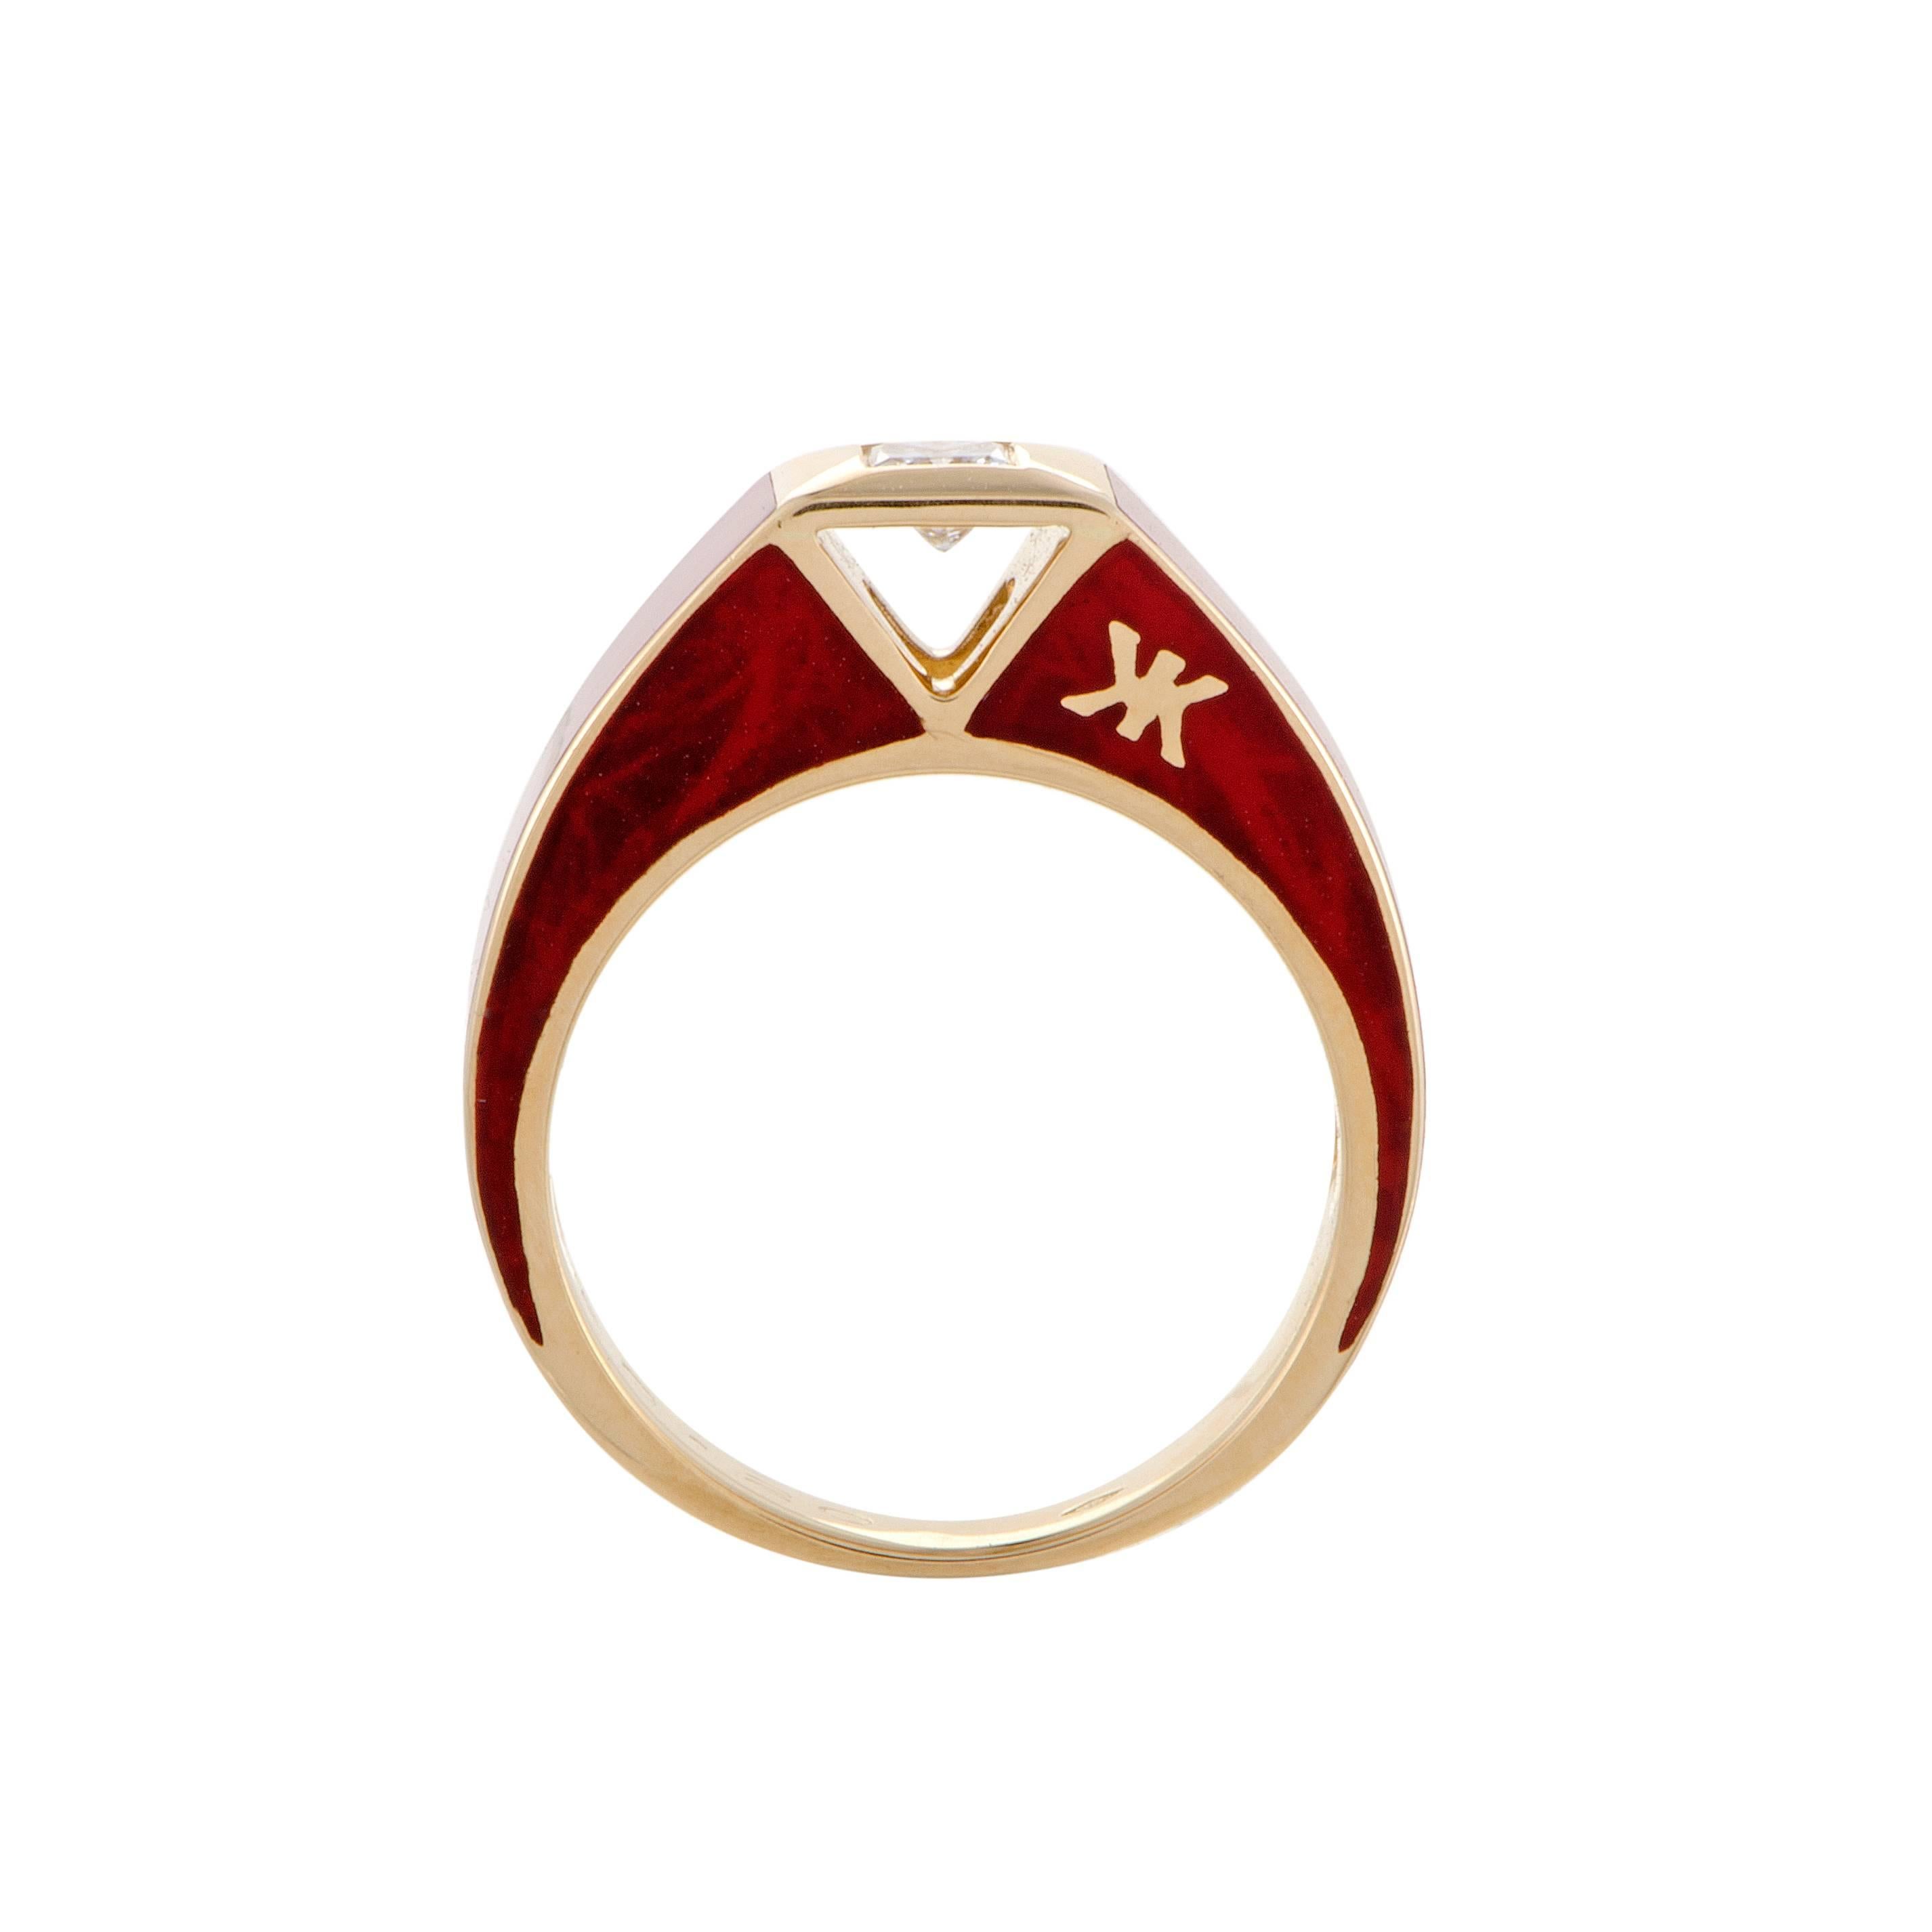 Complemented by a royal nuance of red as well as a lustrous diamond weighing 0.20ct, the luxurious 18K yellow gold is expertly crafted into a wonderful shape in this sublime ring from Korloff which offers classic elegance.
Included Items: Gift